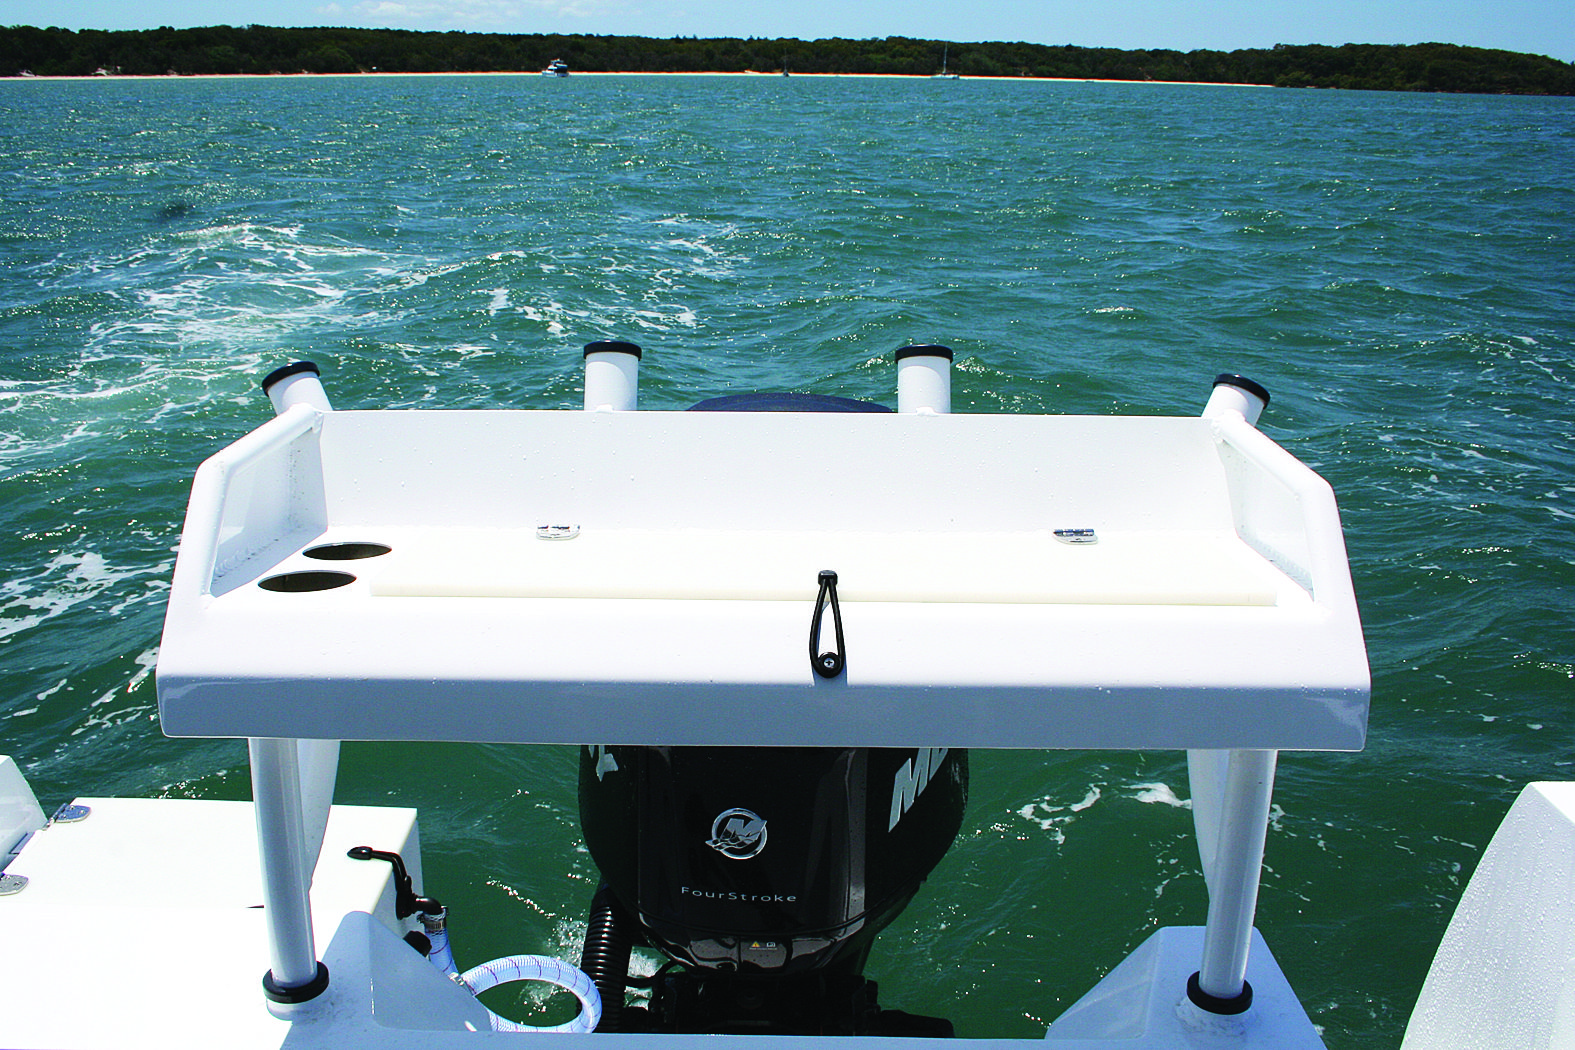 The bait board gives you a good amount of cutting space and doesn’t impede on fishing room.